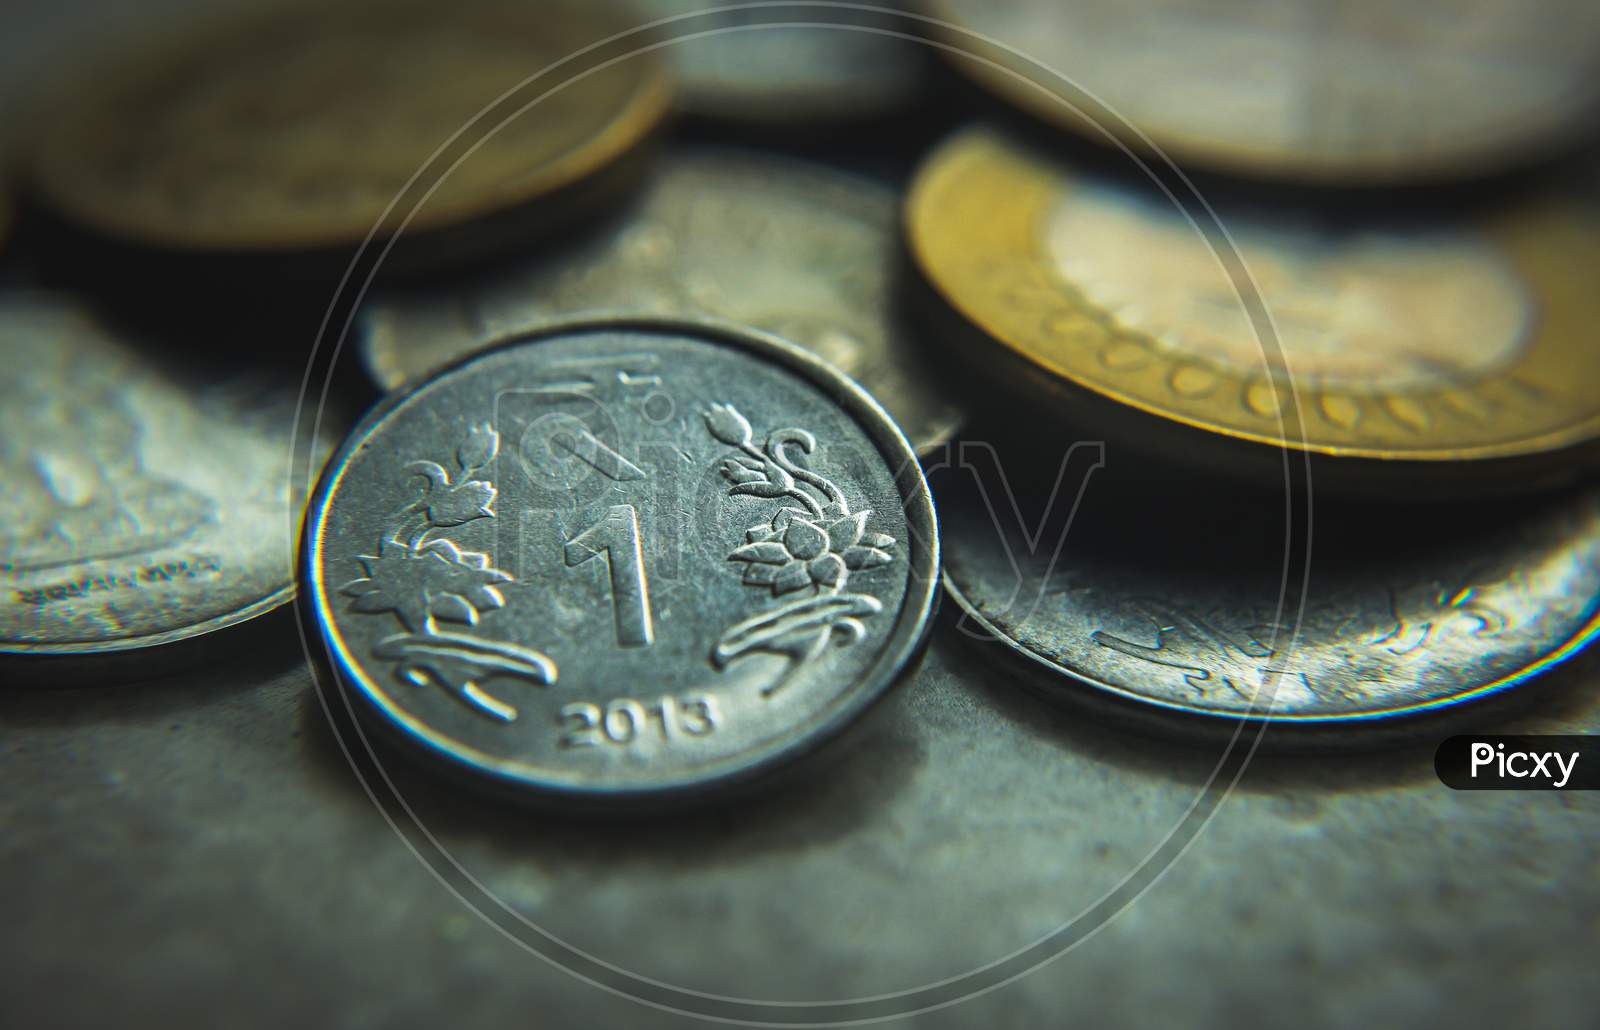 Coins of Indian currency rupee (INR) . Golden five rupee , ten rupee coins and silver one rupee coins. Selective focus on coins with blurred background